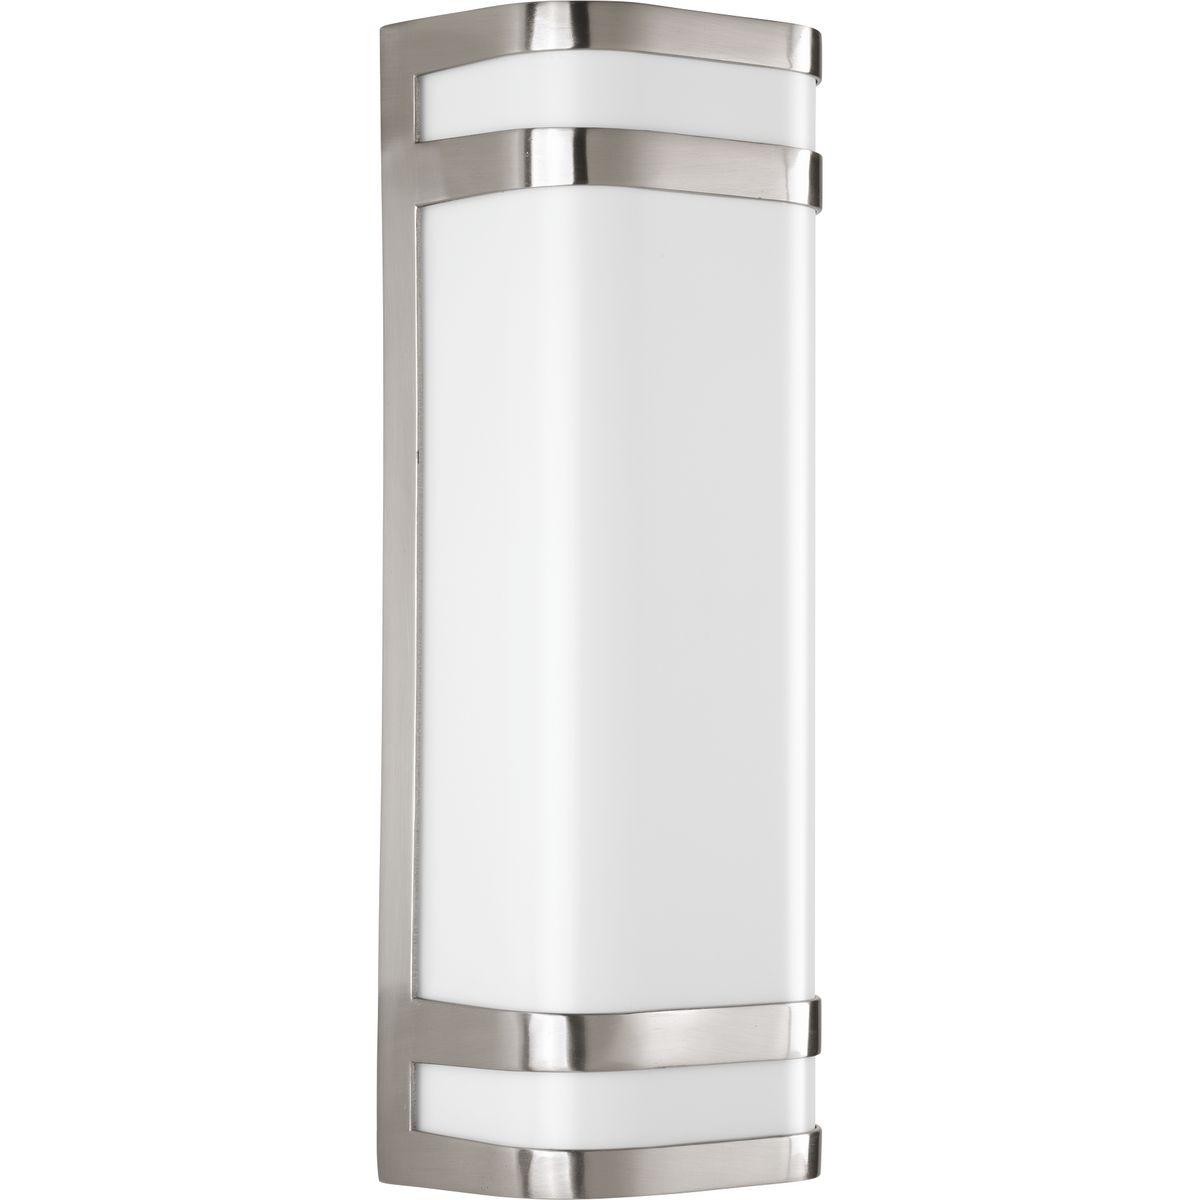 Hubbell P5806-0930K9 Clean lines are up front and center for these modern LED outdoor sconces. Valera features a die-cast aluminum frame and matte white, acrylic diffuser. Energy efficient LED source offers 3000K color temperature and 90+CRI output. Title 24 compliant. Two-li